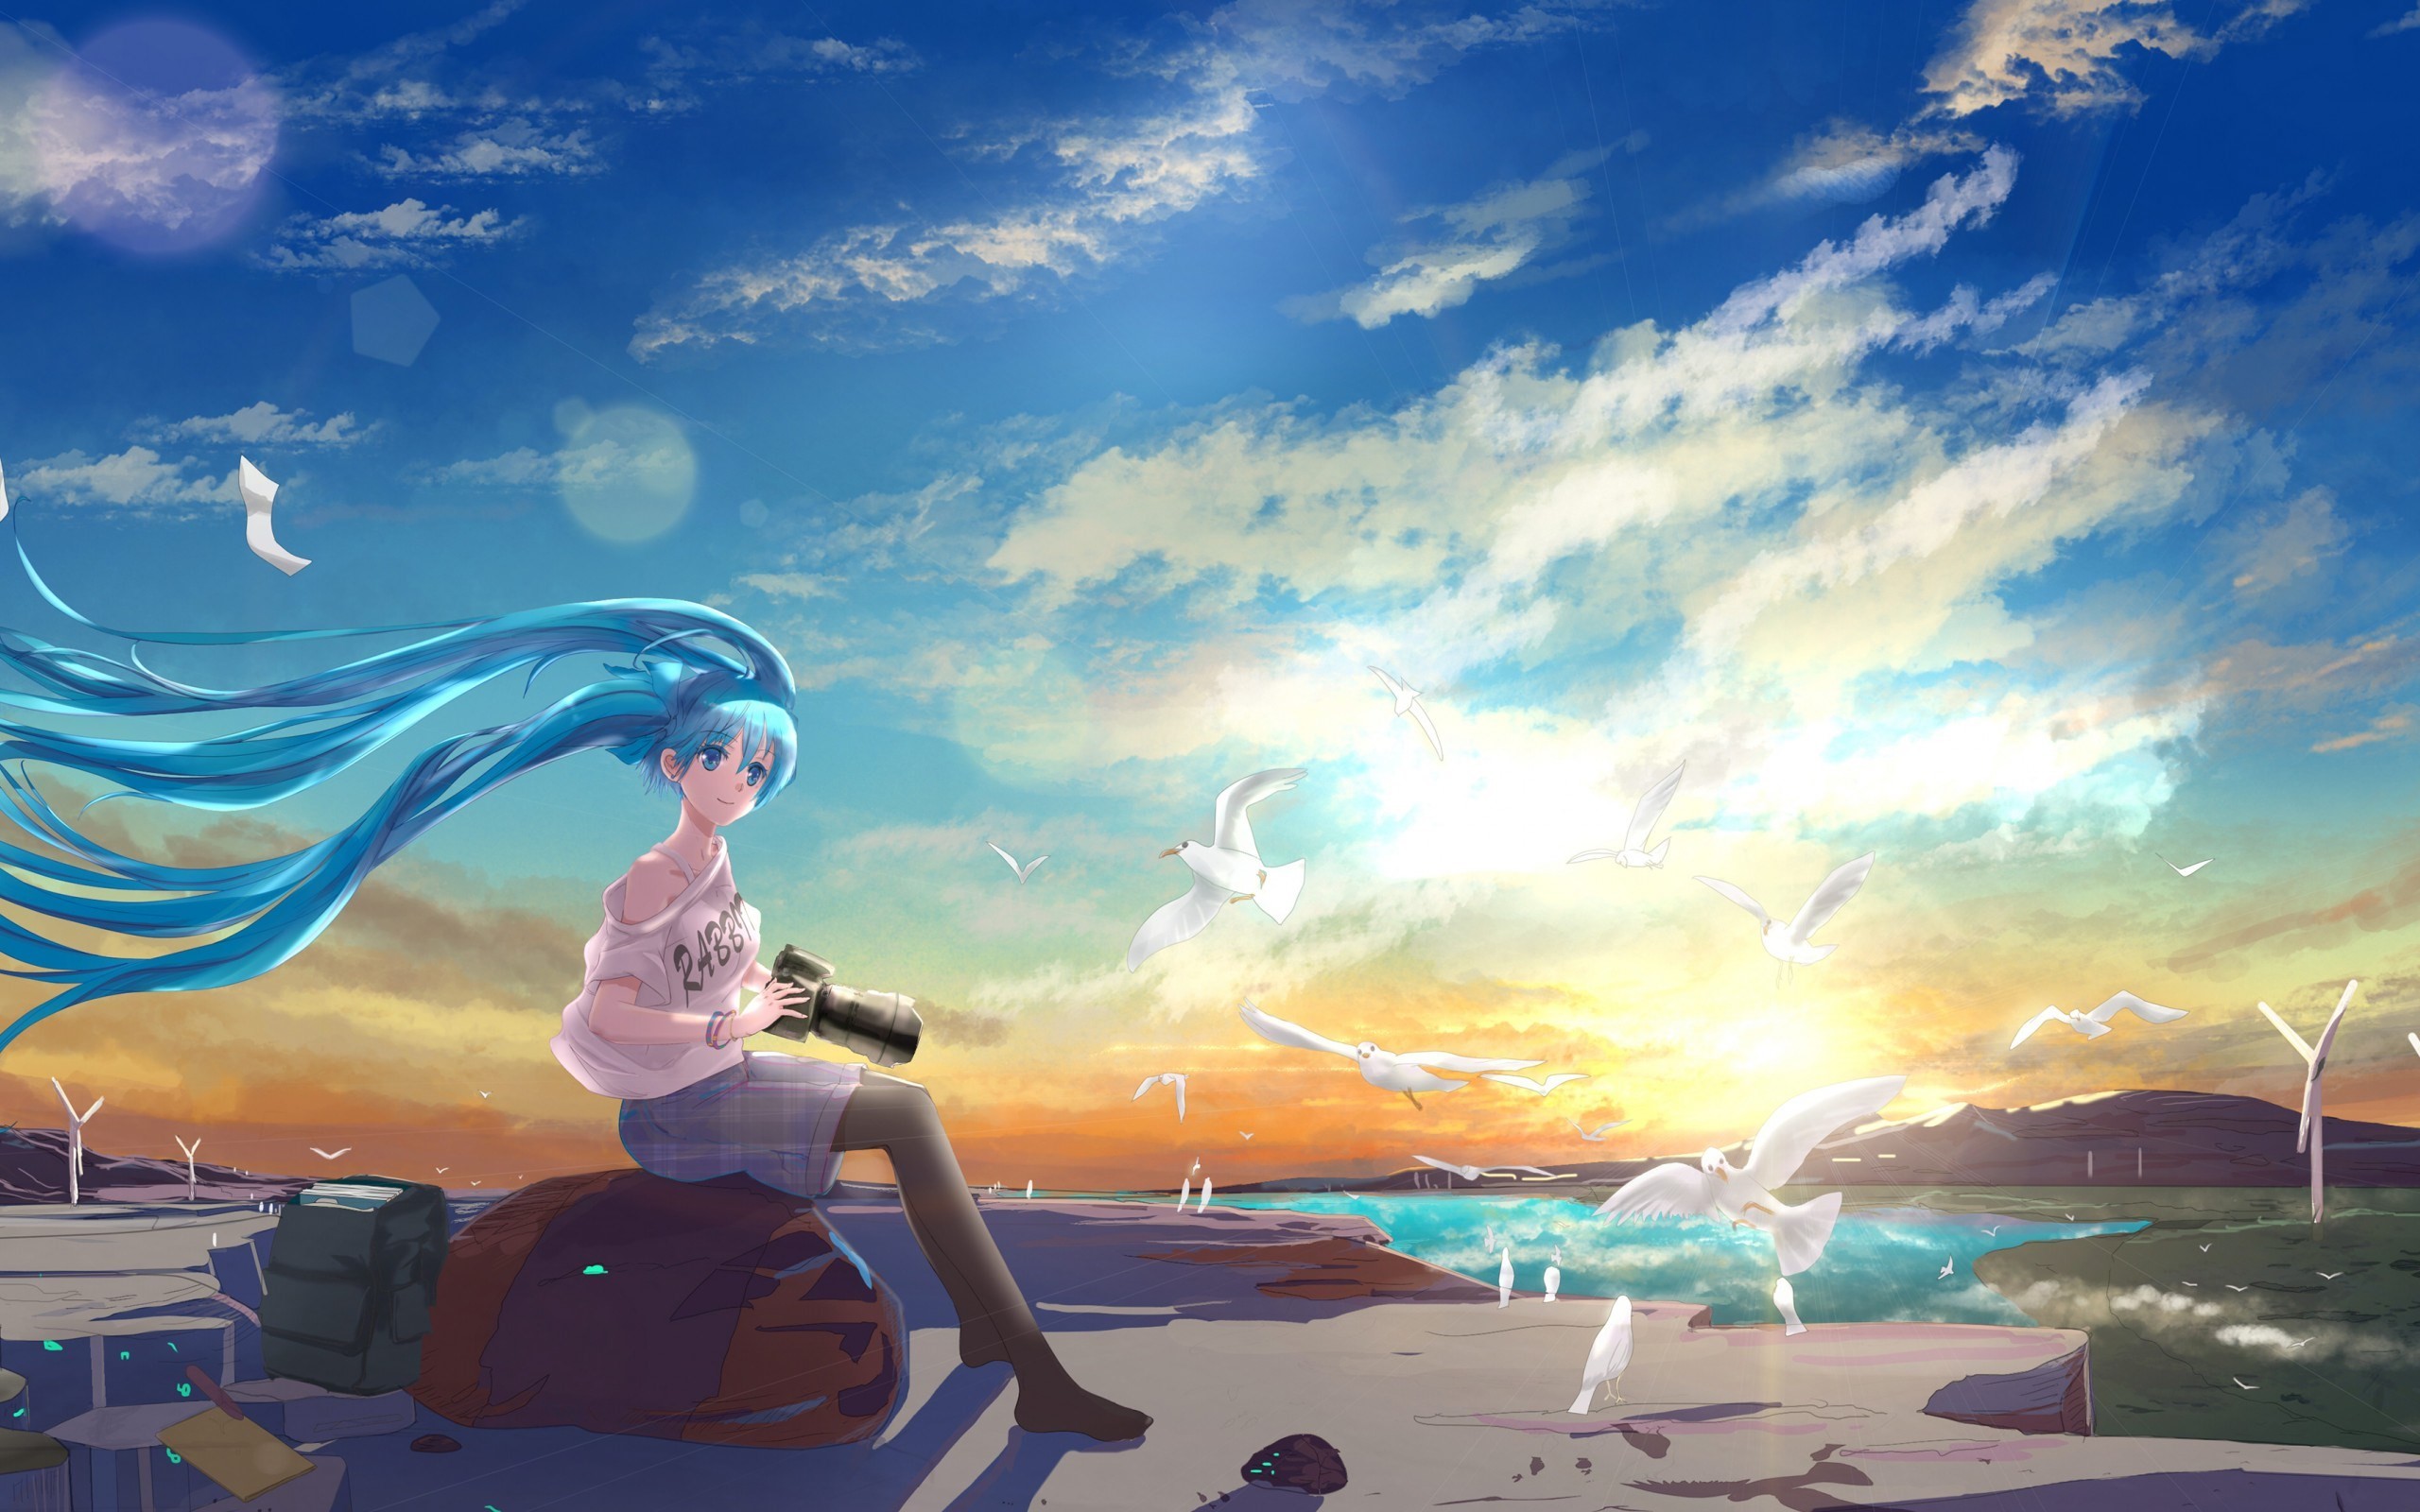 2560x1600 vocaloid wallpaper: Wallpapers Collection, 561 kB - Caldwell Turner